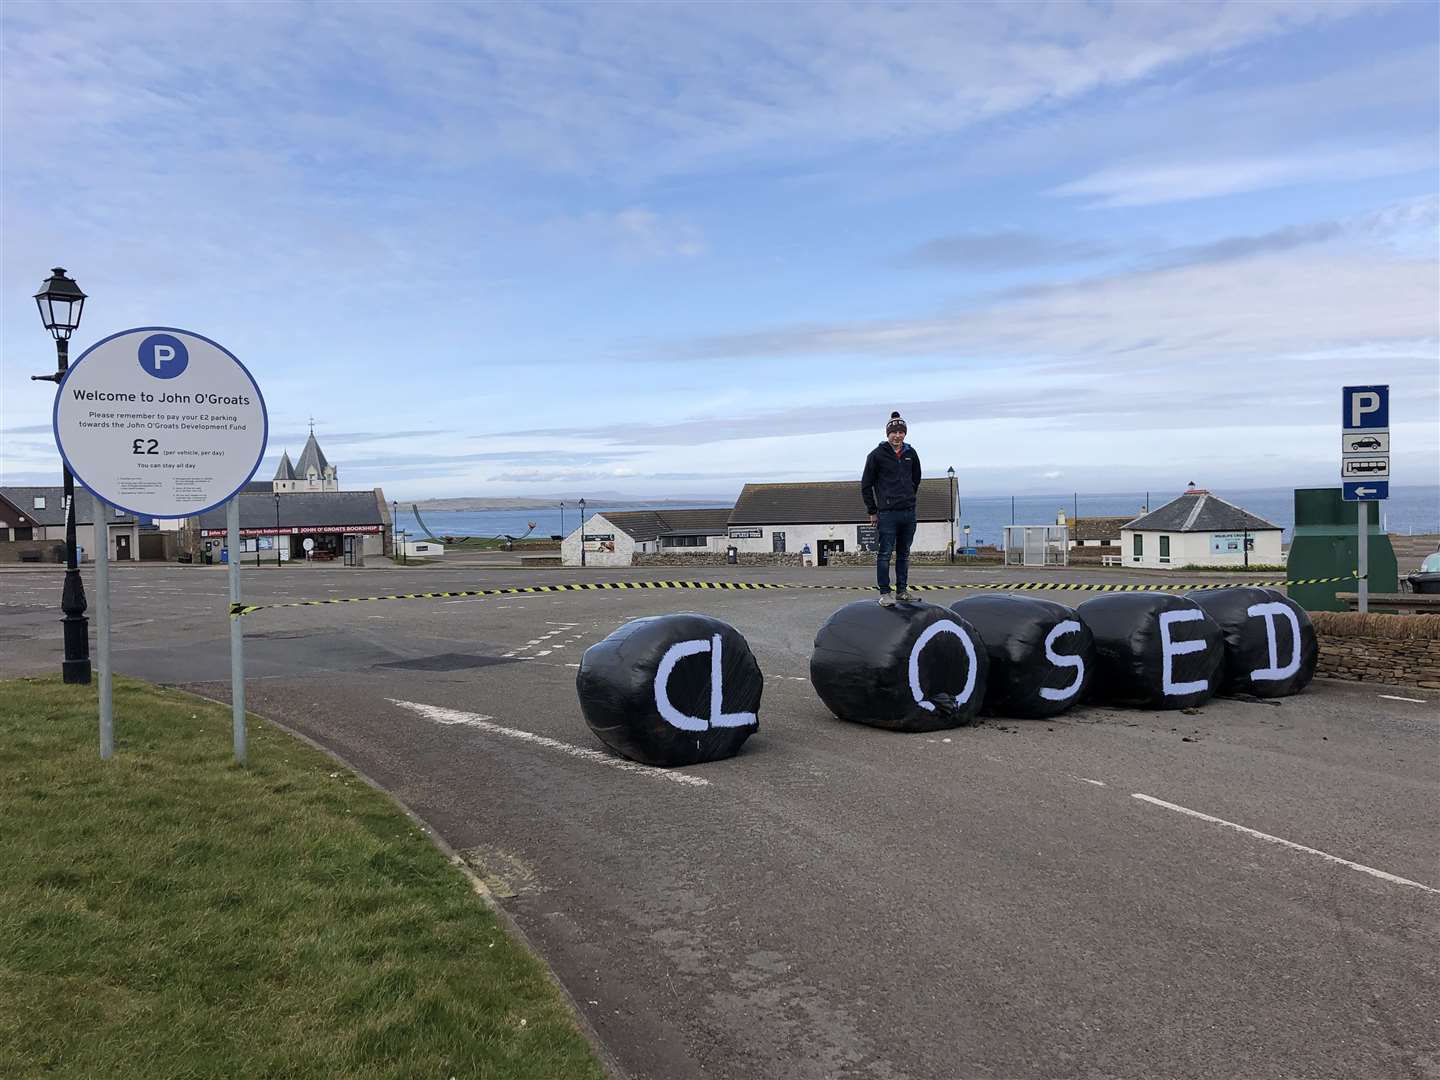 Closed for the time being: Michael Mowat on the bales at the John O'Groats car park.